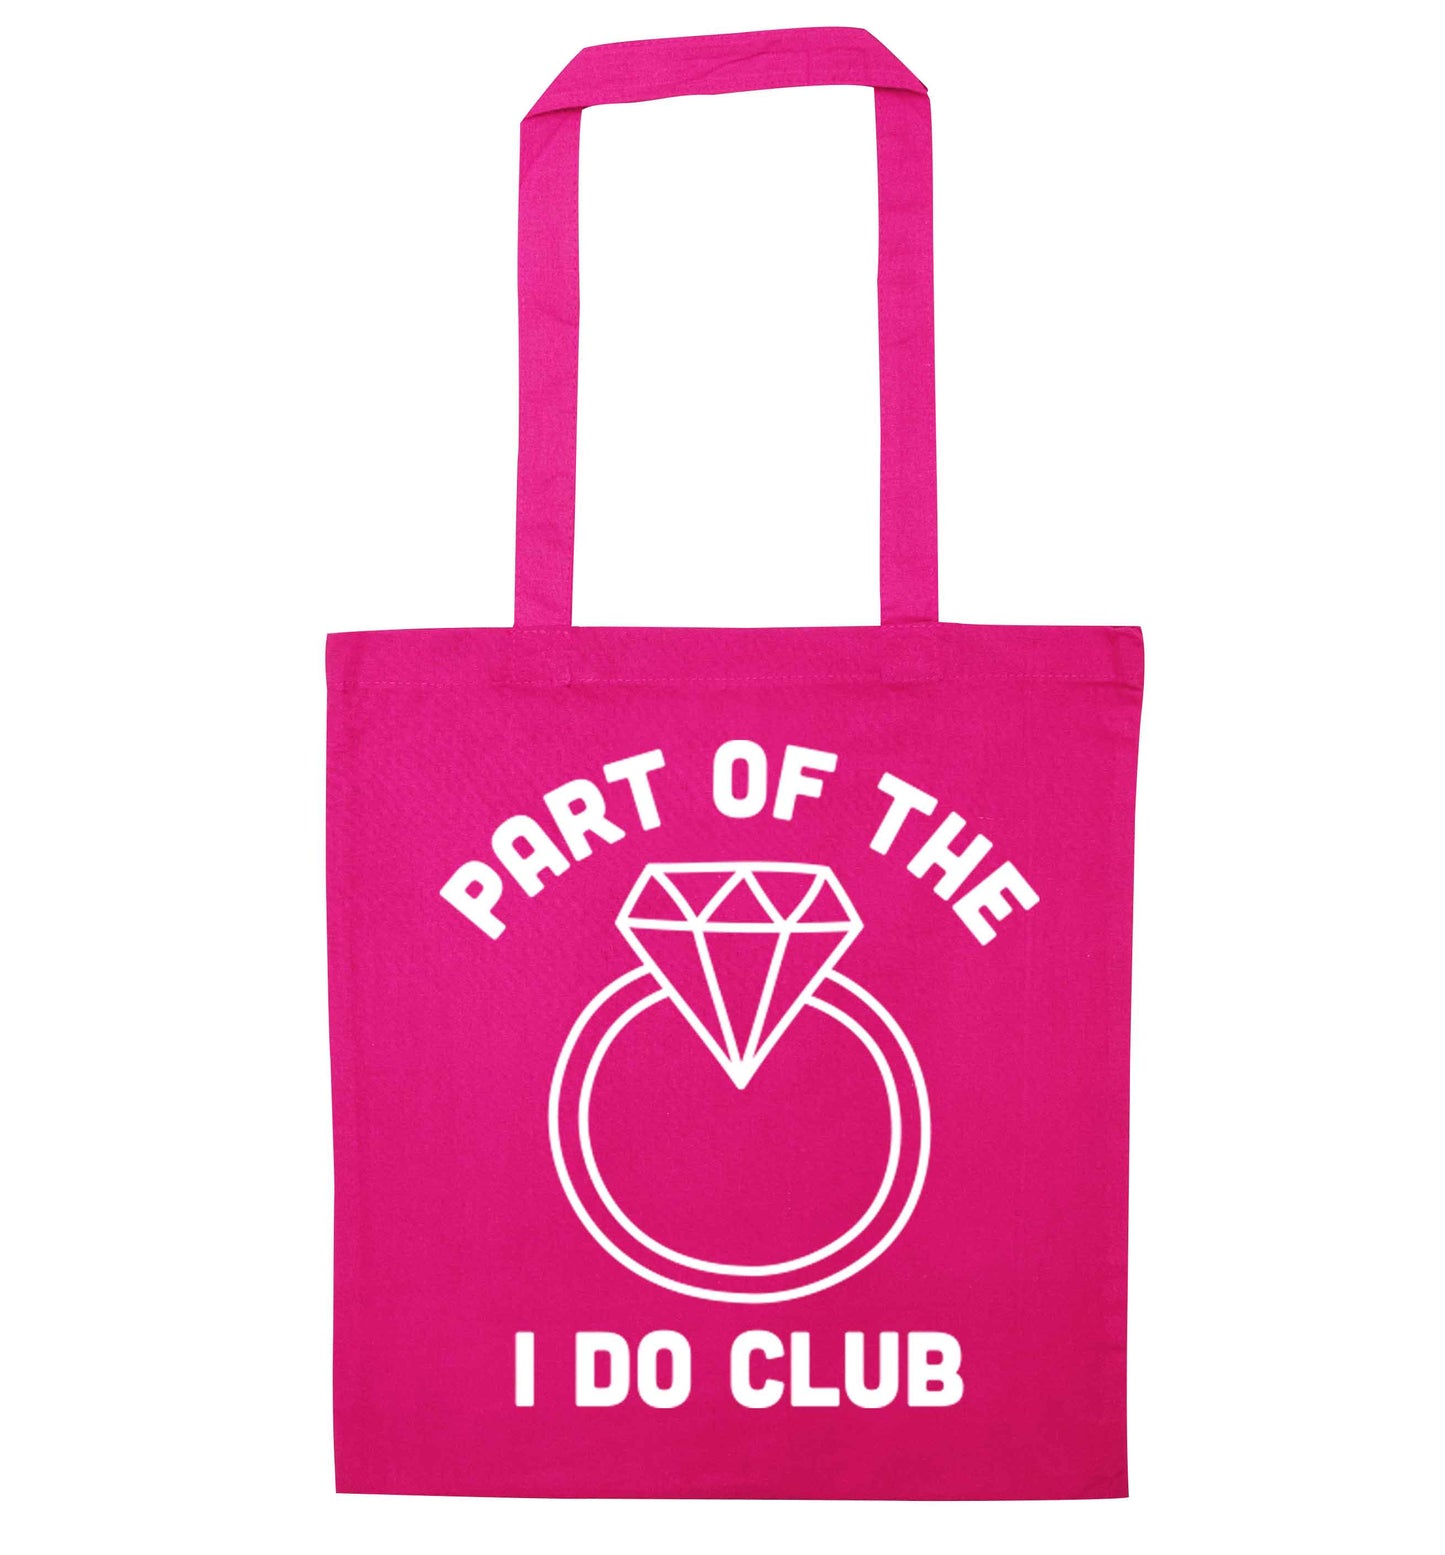 Part of the I do club pink tote bag